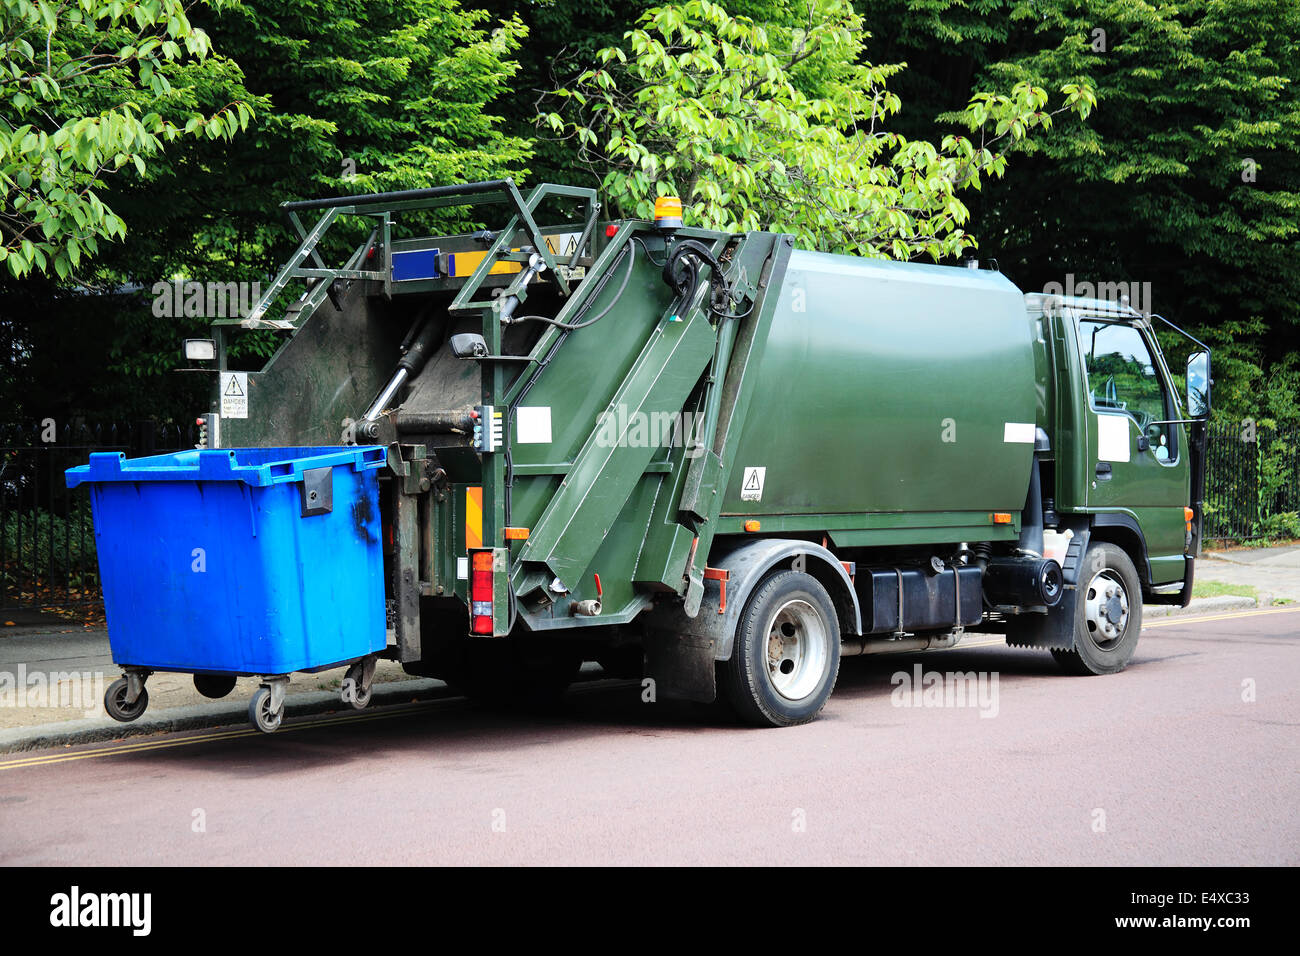 Dustbin Lorry Stock Photos & Dustbin Lorry Stock Images - Alamy